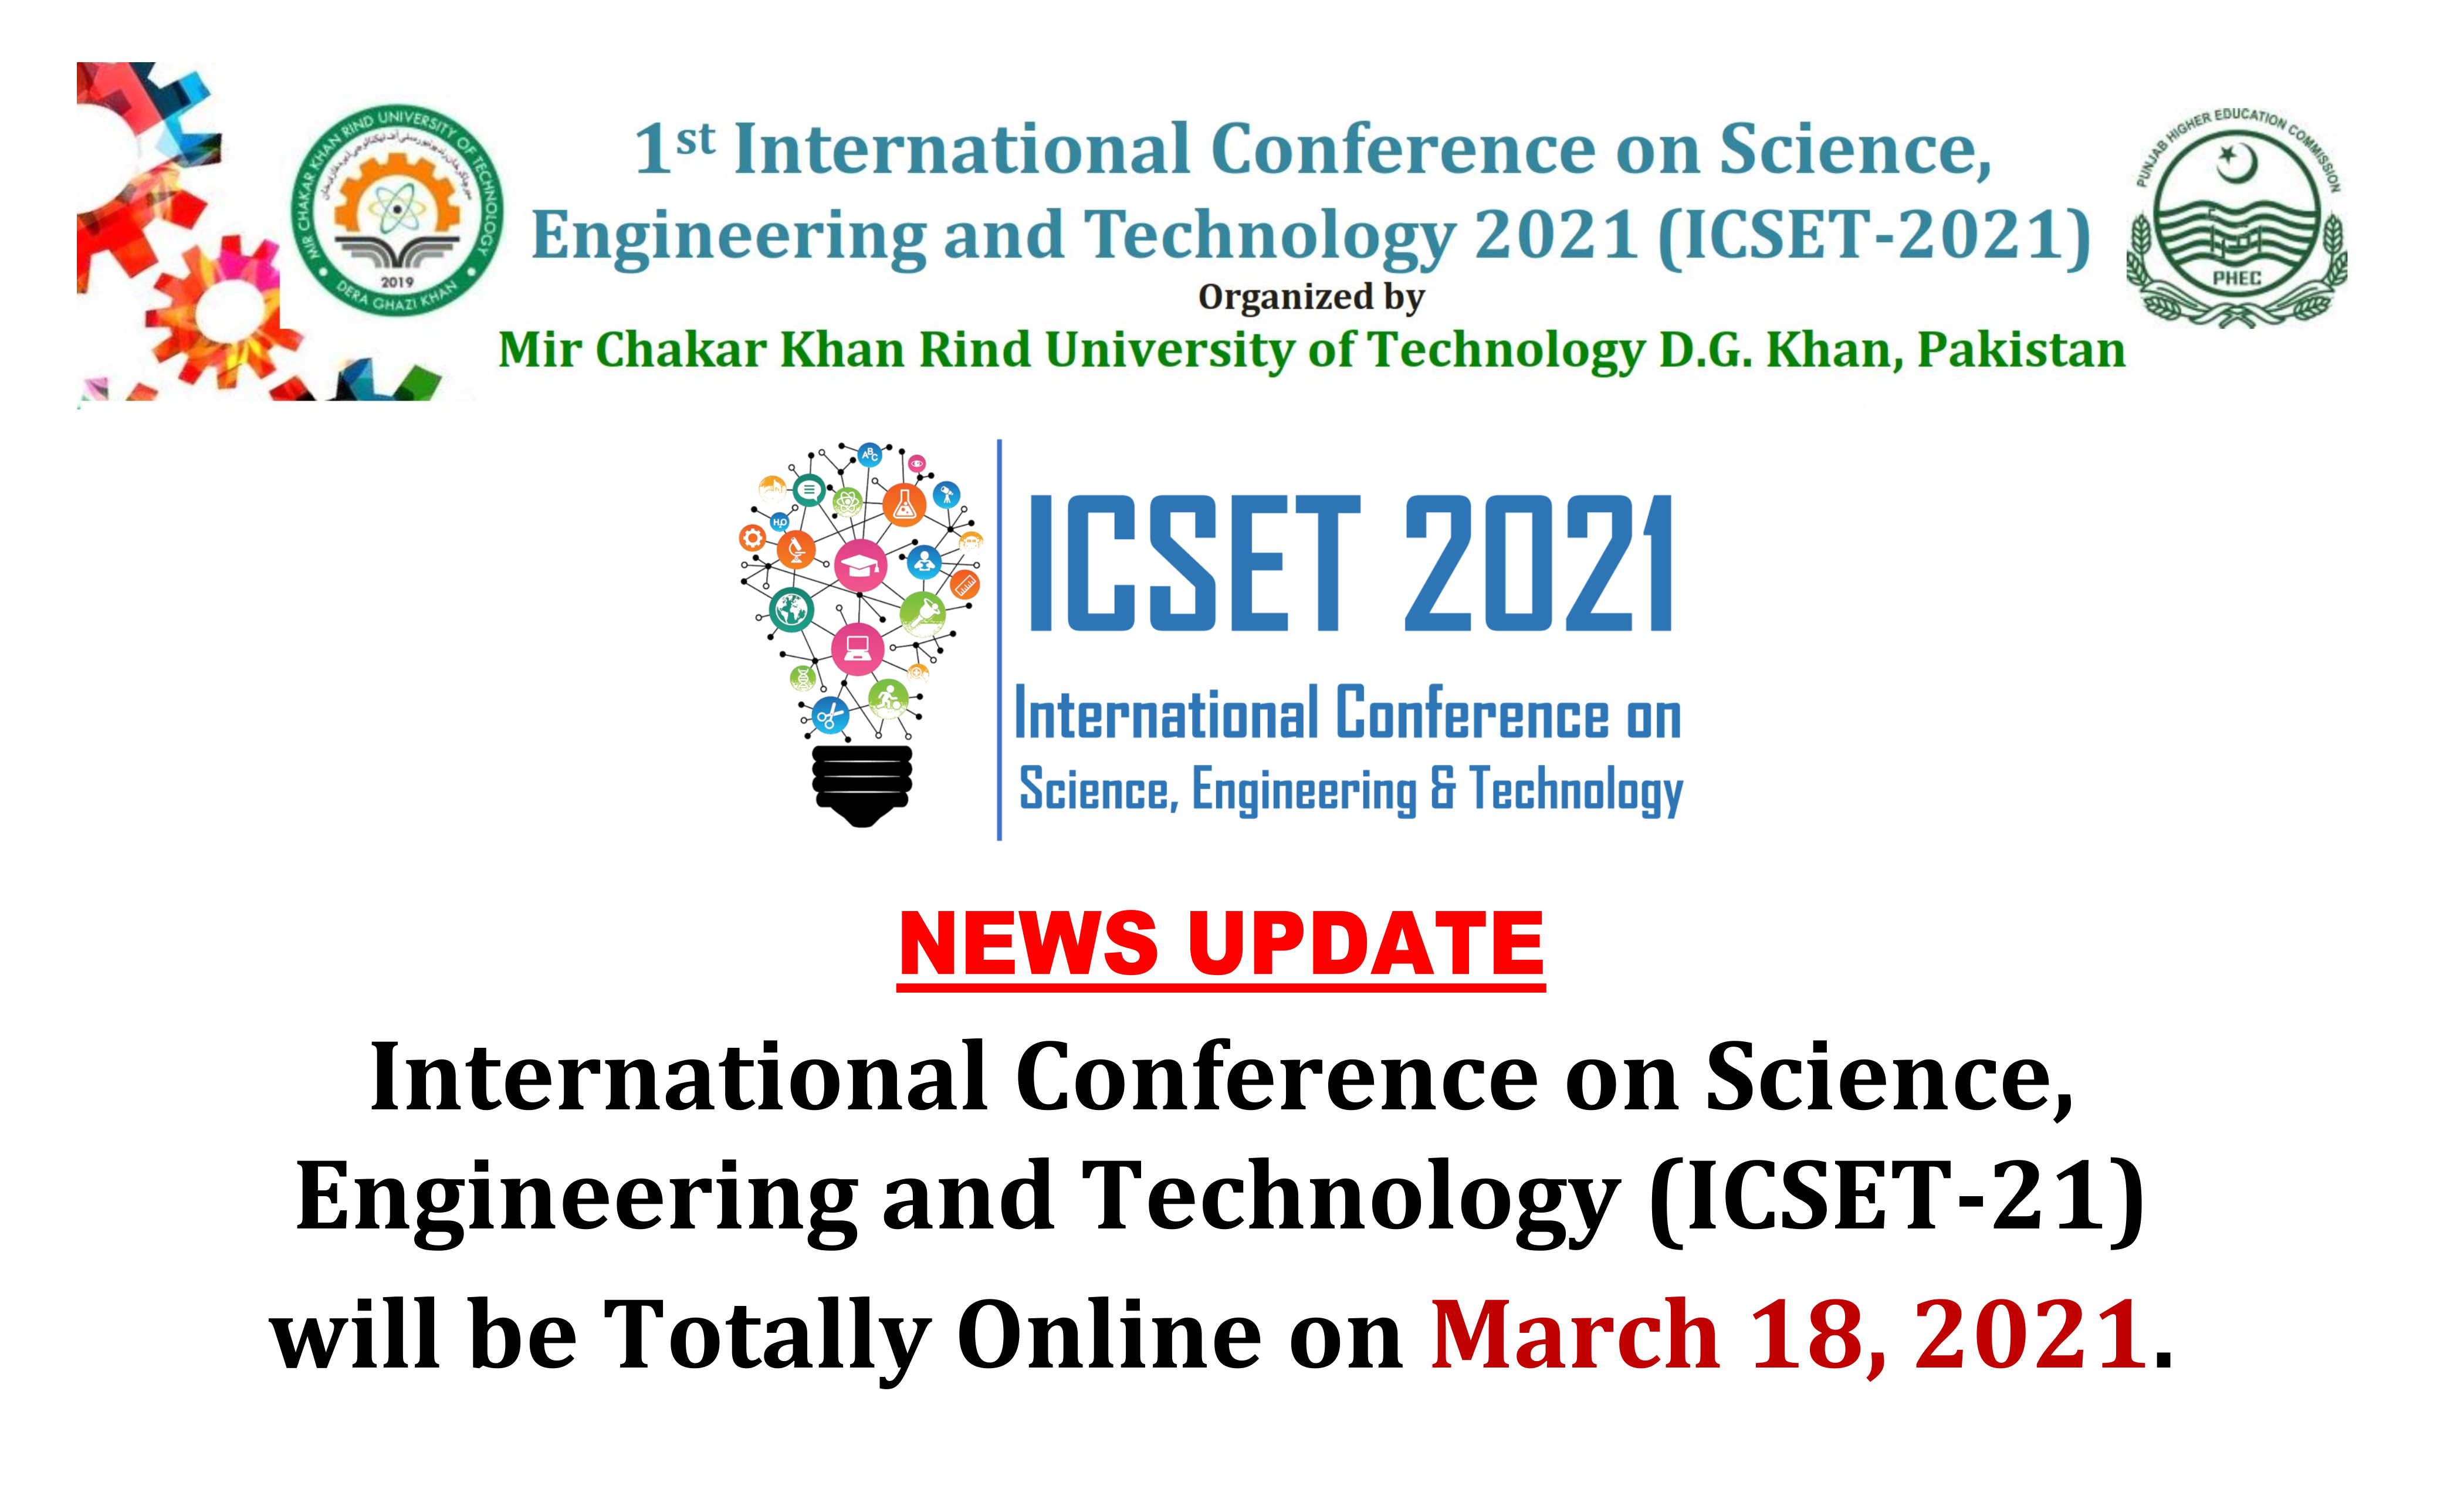 News Update: International Conference on Science, Engineering and Technology (ICSET-21) will be Totally Online.